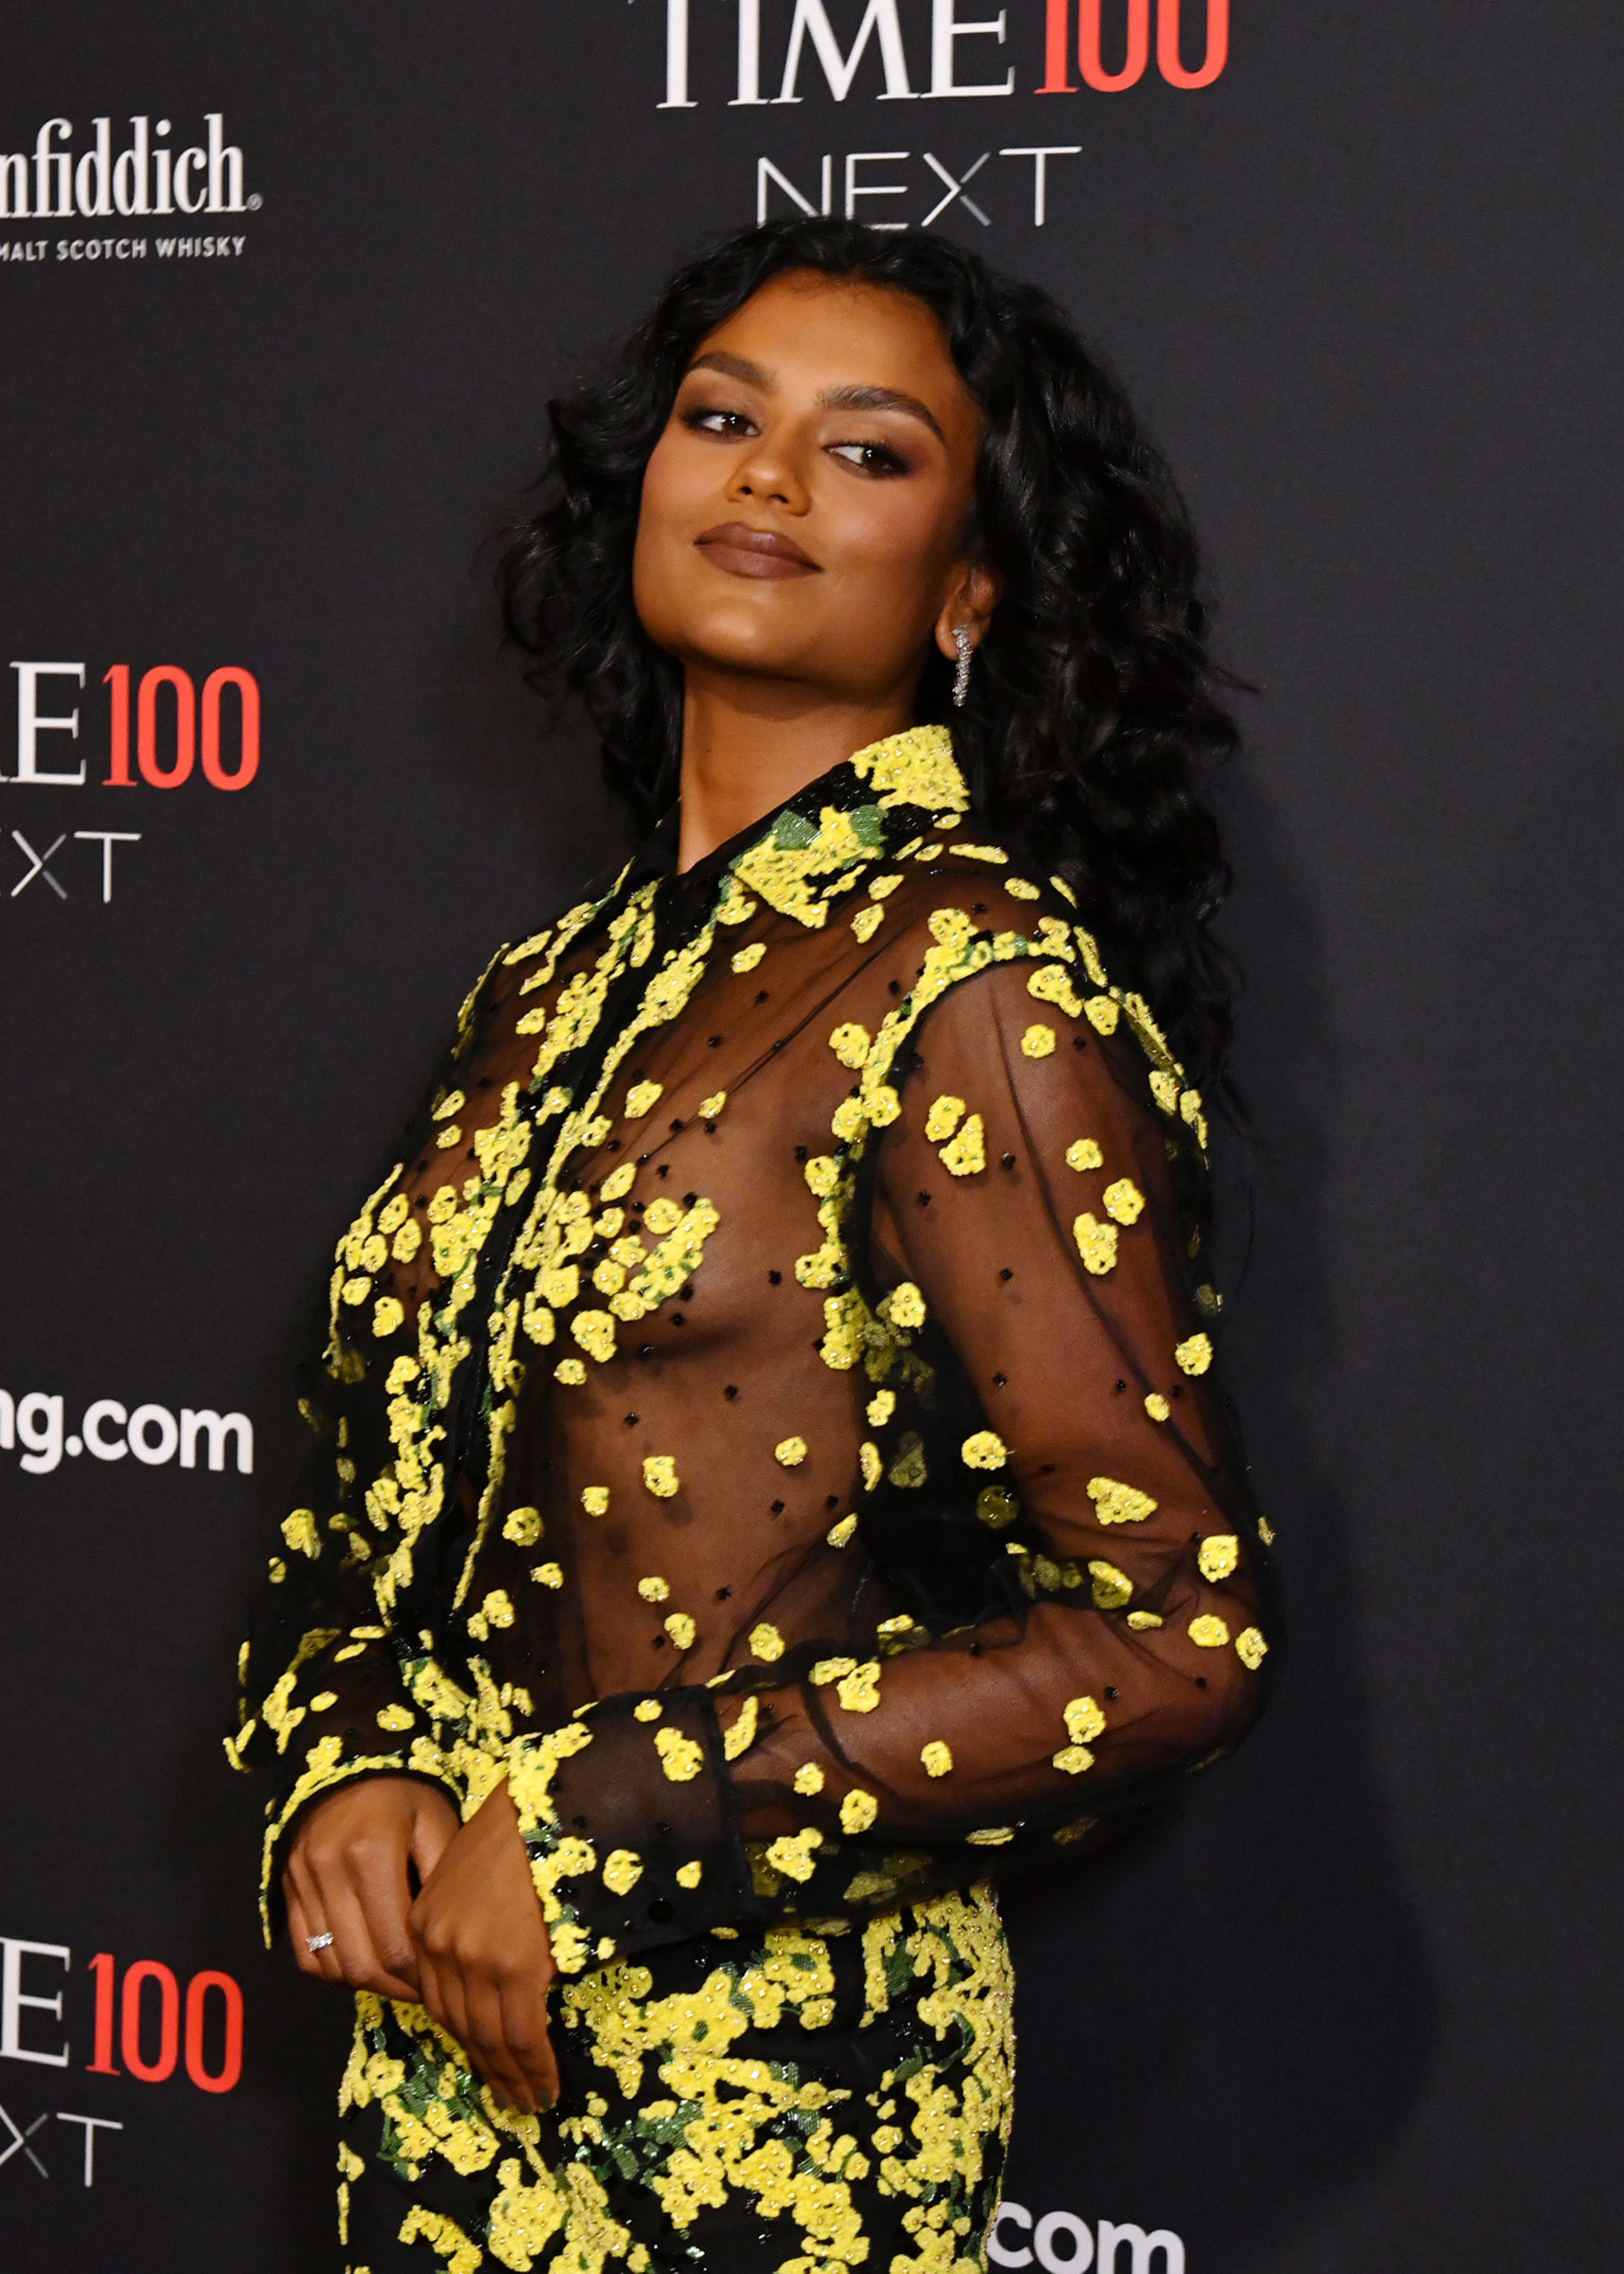 Actor Simone Ashley attends the TIME100 Next Gala in New York City on Oct. 25, 2022. (Craig Barritt—Getty Images for TIME)